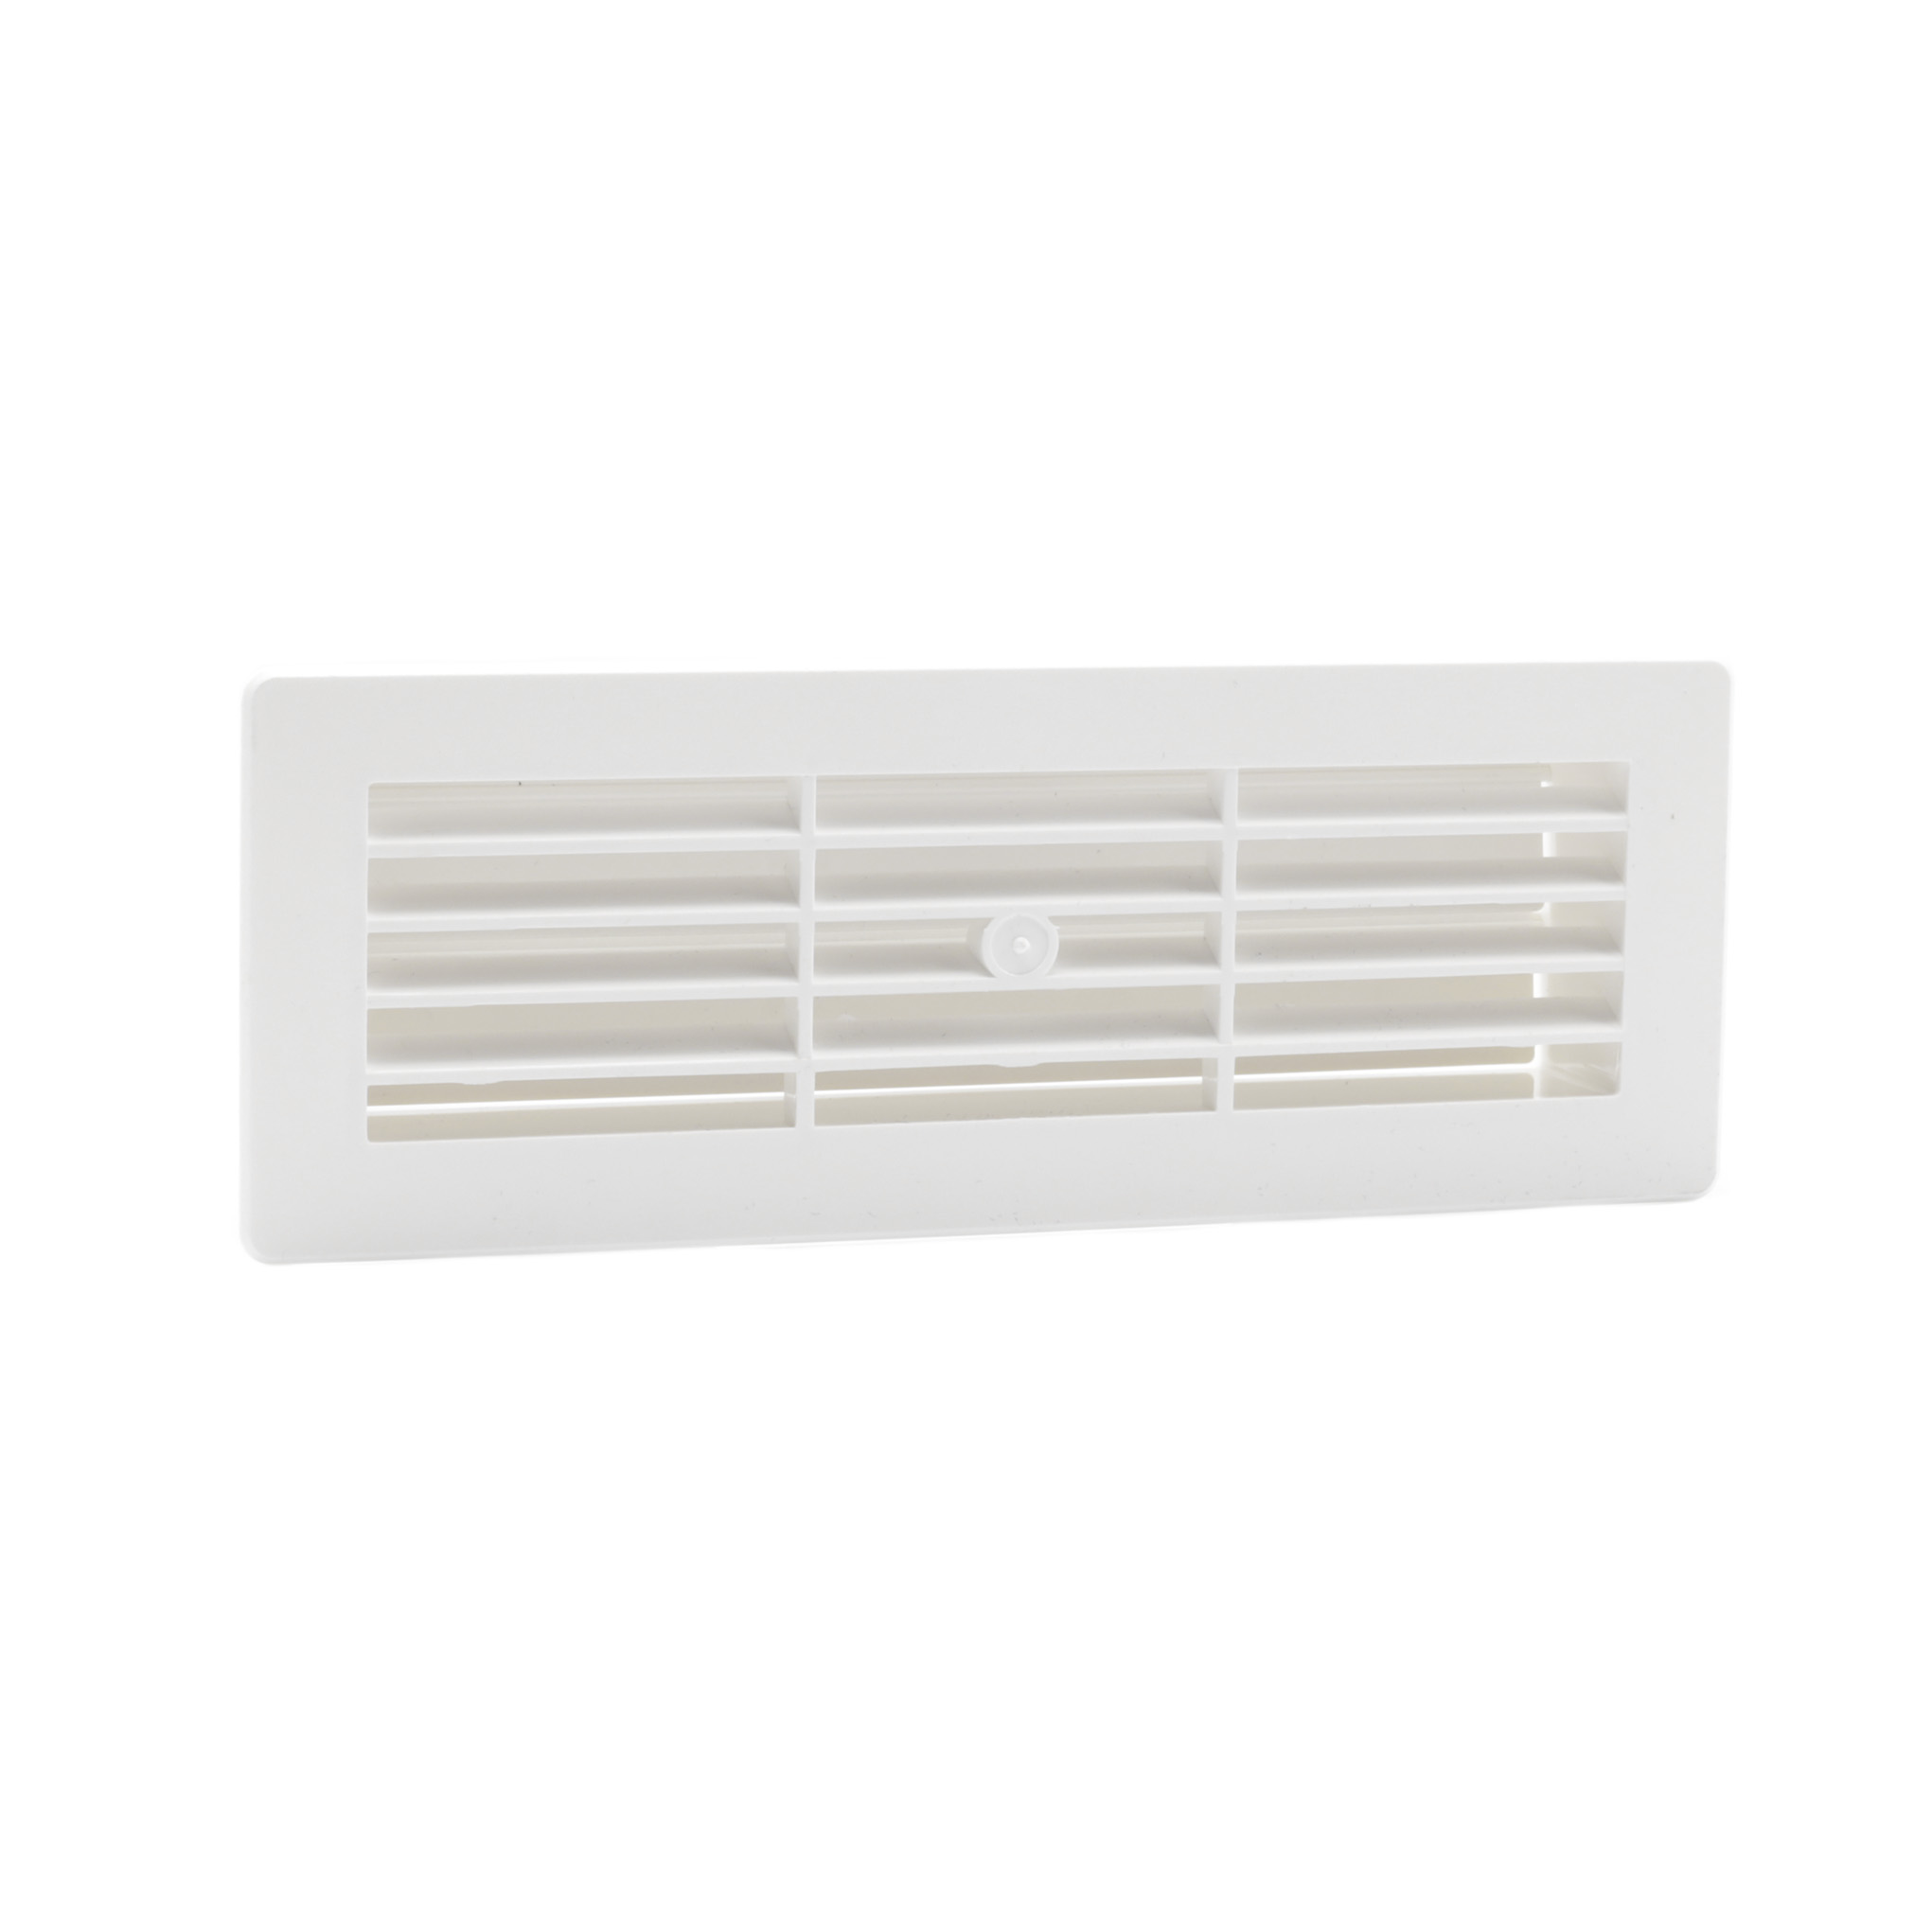 62503500 Wall outlet/ventilation grille 204x60mm  204x60mm White